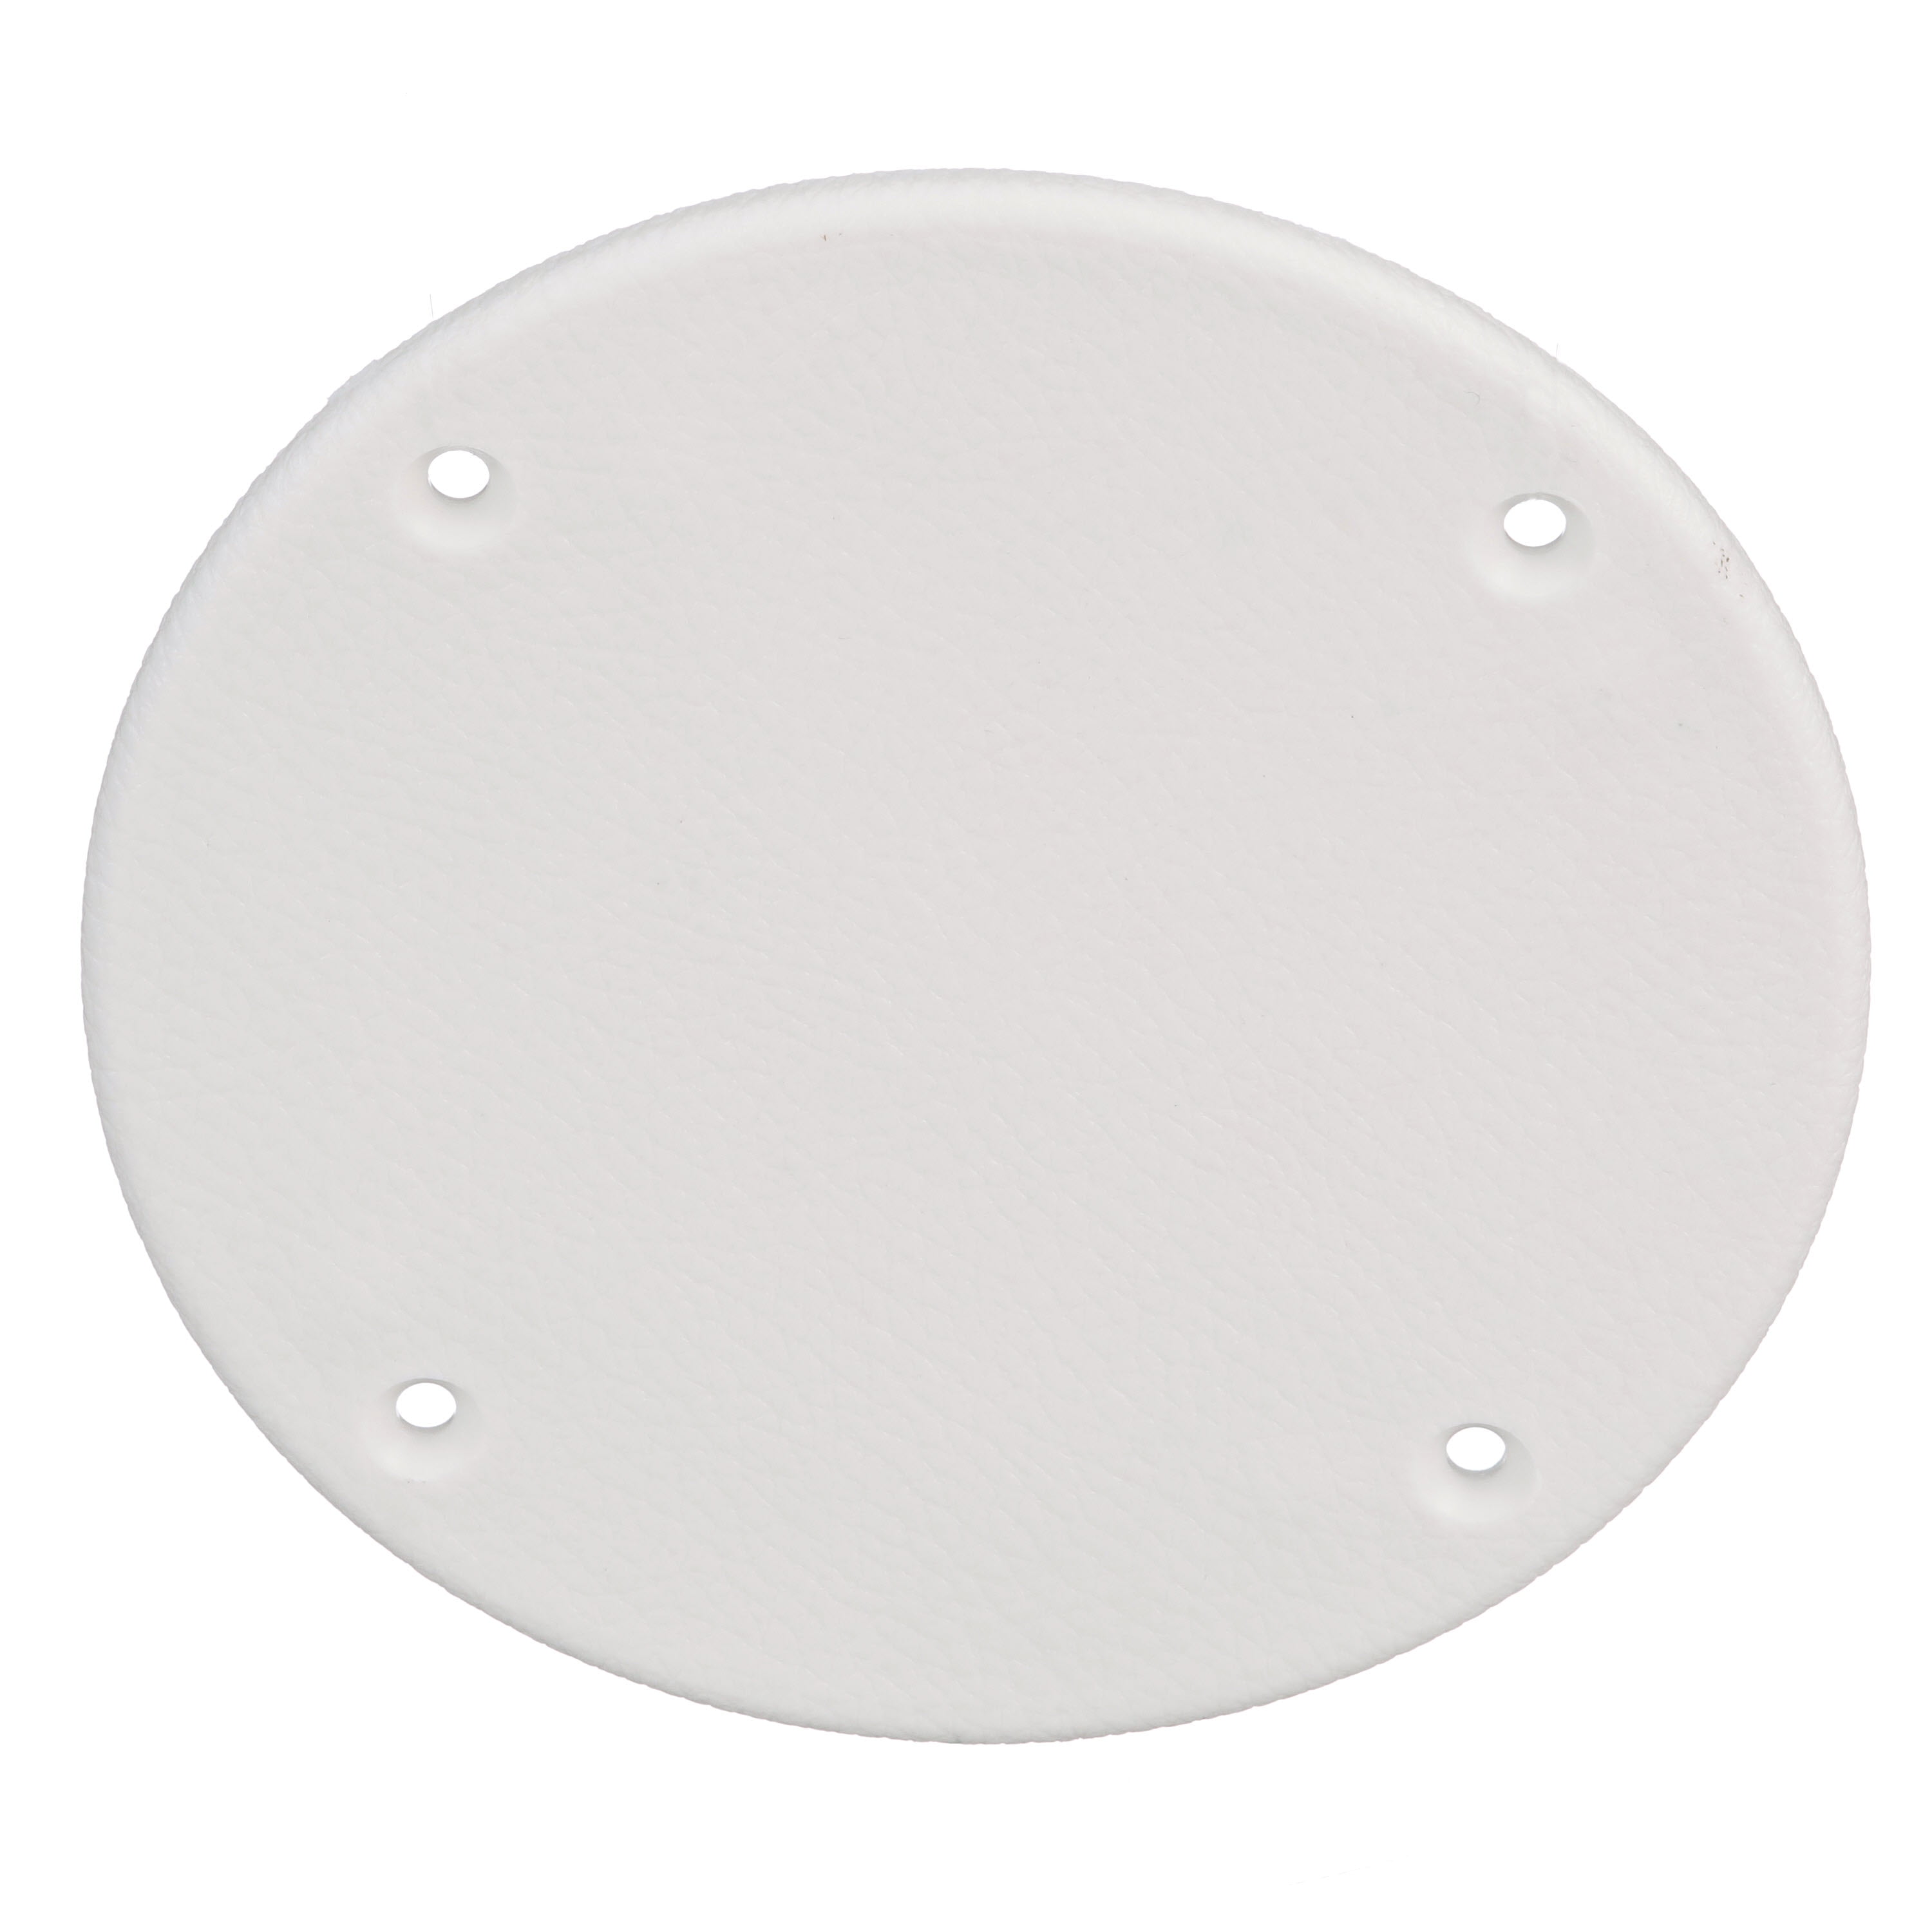 SEACHOICE 39601 Mounted Boat Plate Cover up to 4 Inches 50-39601 Arctic ...